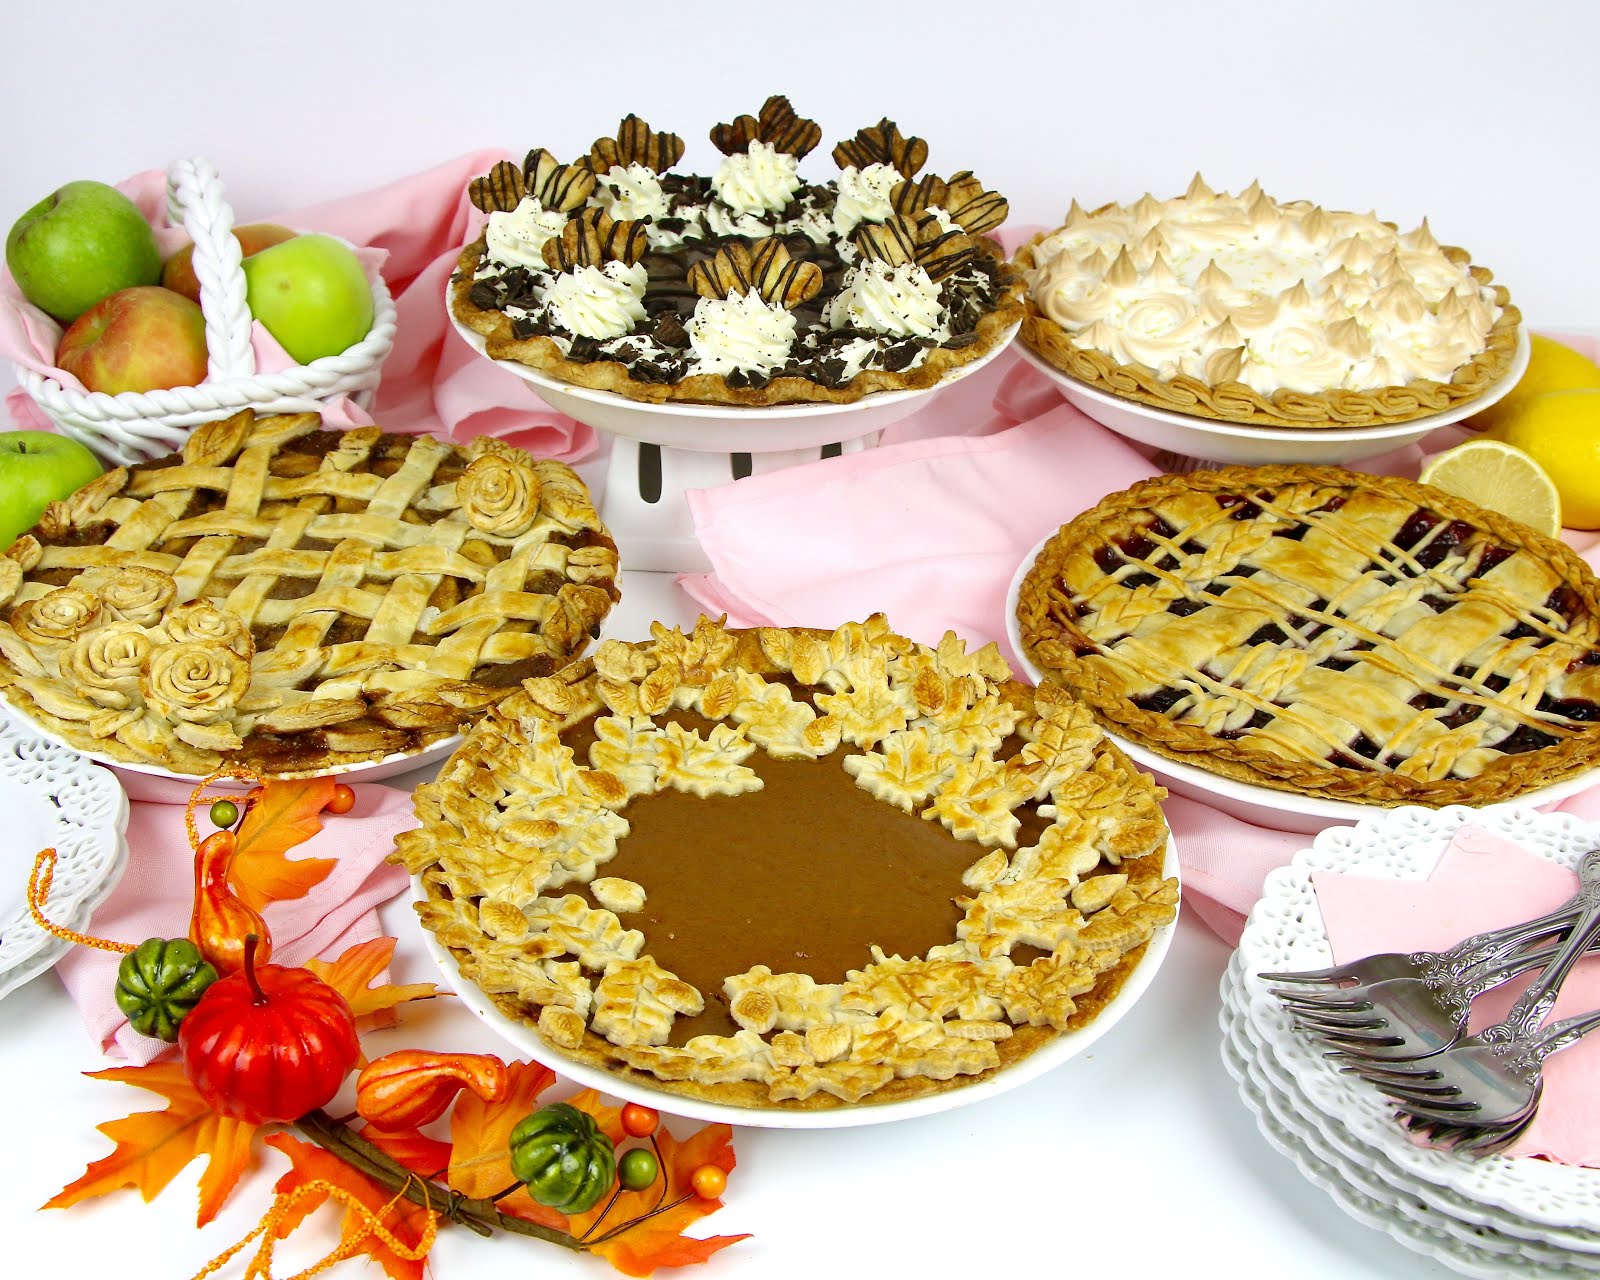 How to Make Decorative Pie Crusts